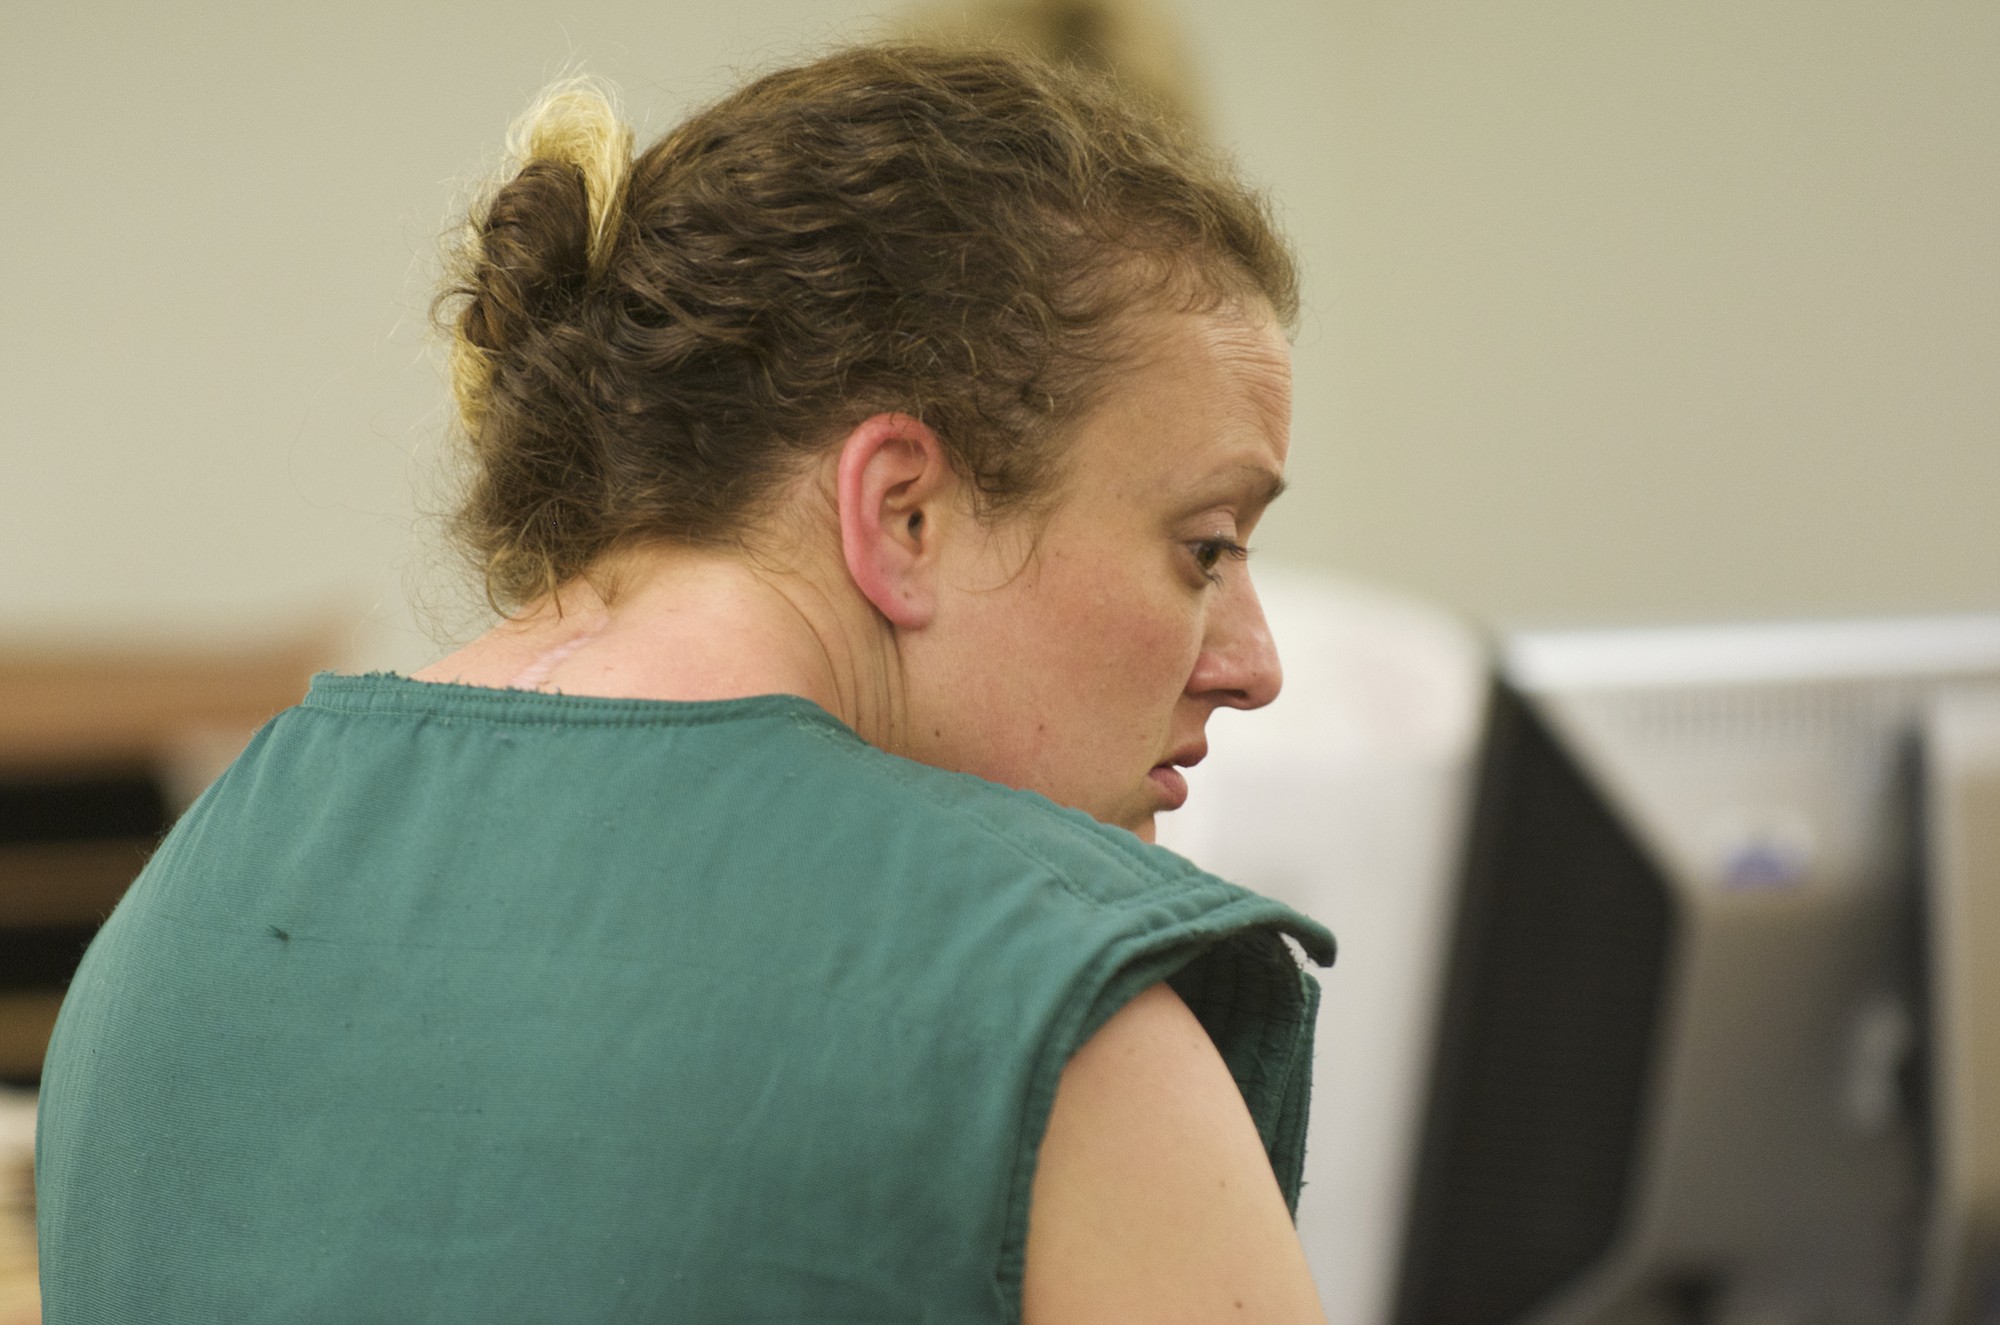 Tanya Leffler of Amboy makes her first appearance in Clark County Superior Court on charges of vehicular homicide on Thursday in the April 14 death of James Luden of Vancouver.